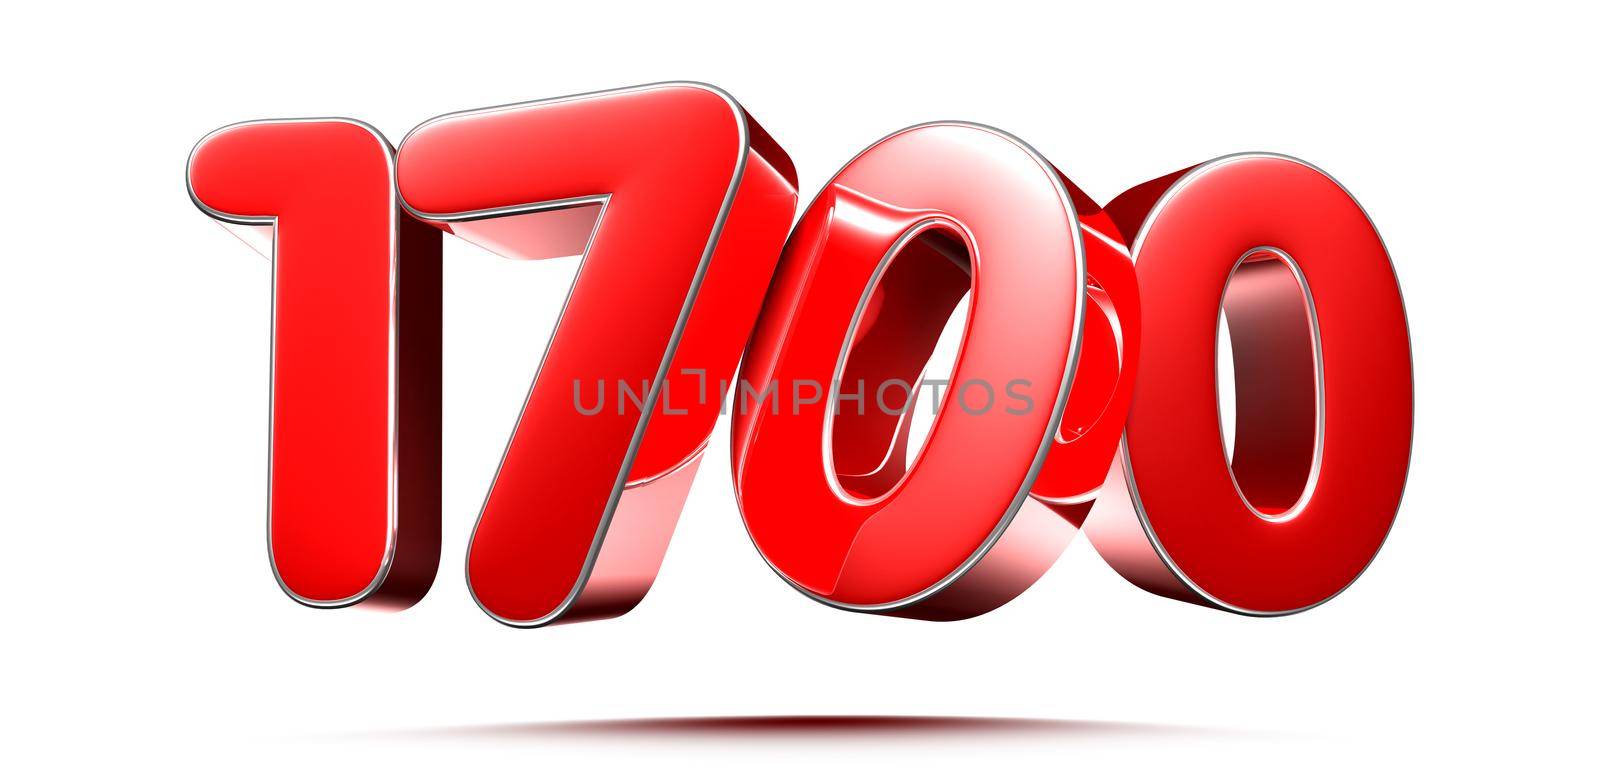 Rounded red numbers 1700 on white background 3D illustration with clipping path by thitimontoyai